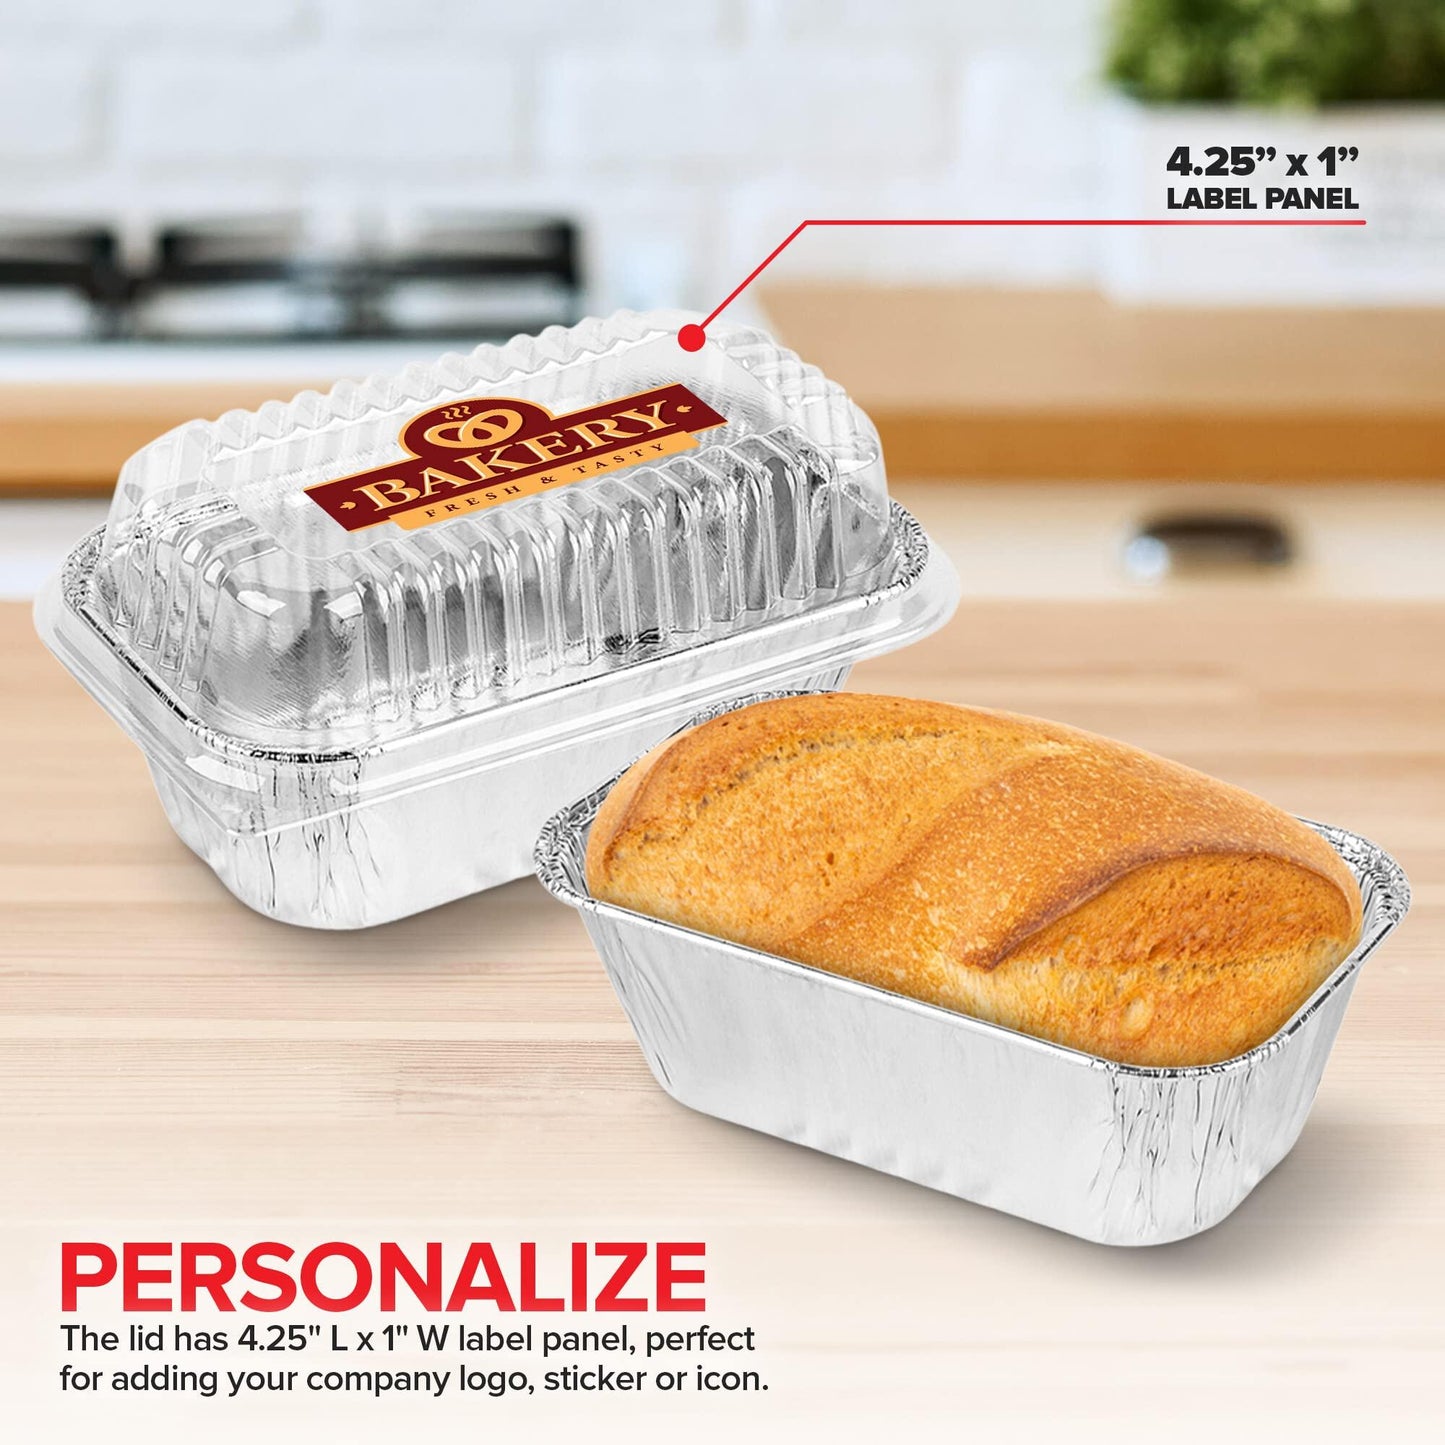 Stock Your Home Disposable Aluminum Mini Loaf Pans with Lids, 1 lb (50 Pack) New & Improved Plastic Dome Lid Foil Baking Tins, Tin Pans for Cake, Bread, Holiday Baked Goods Packaging - CookCave